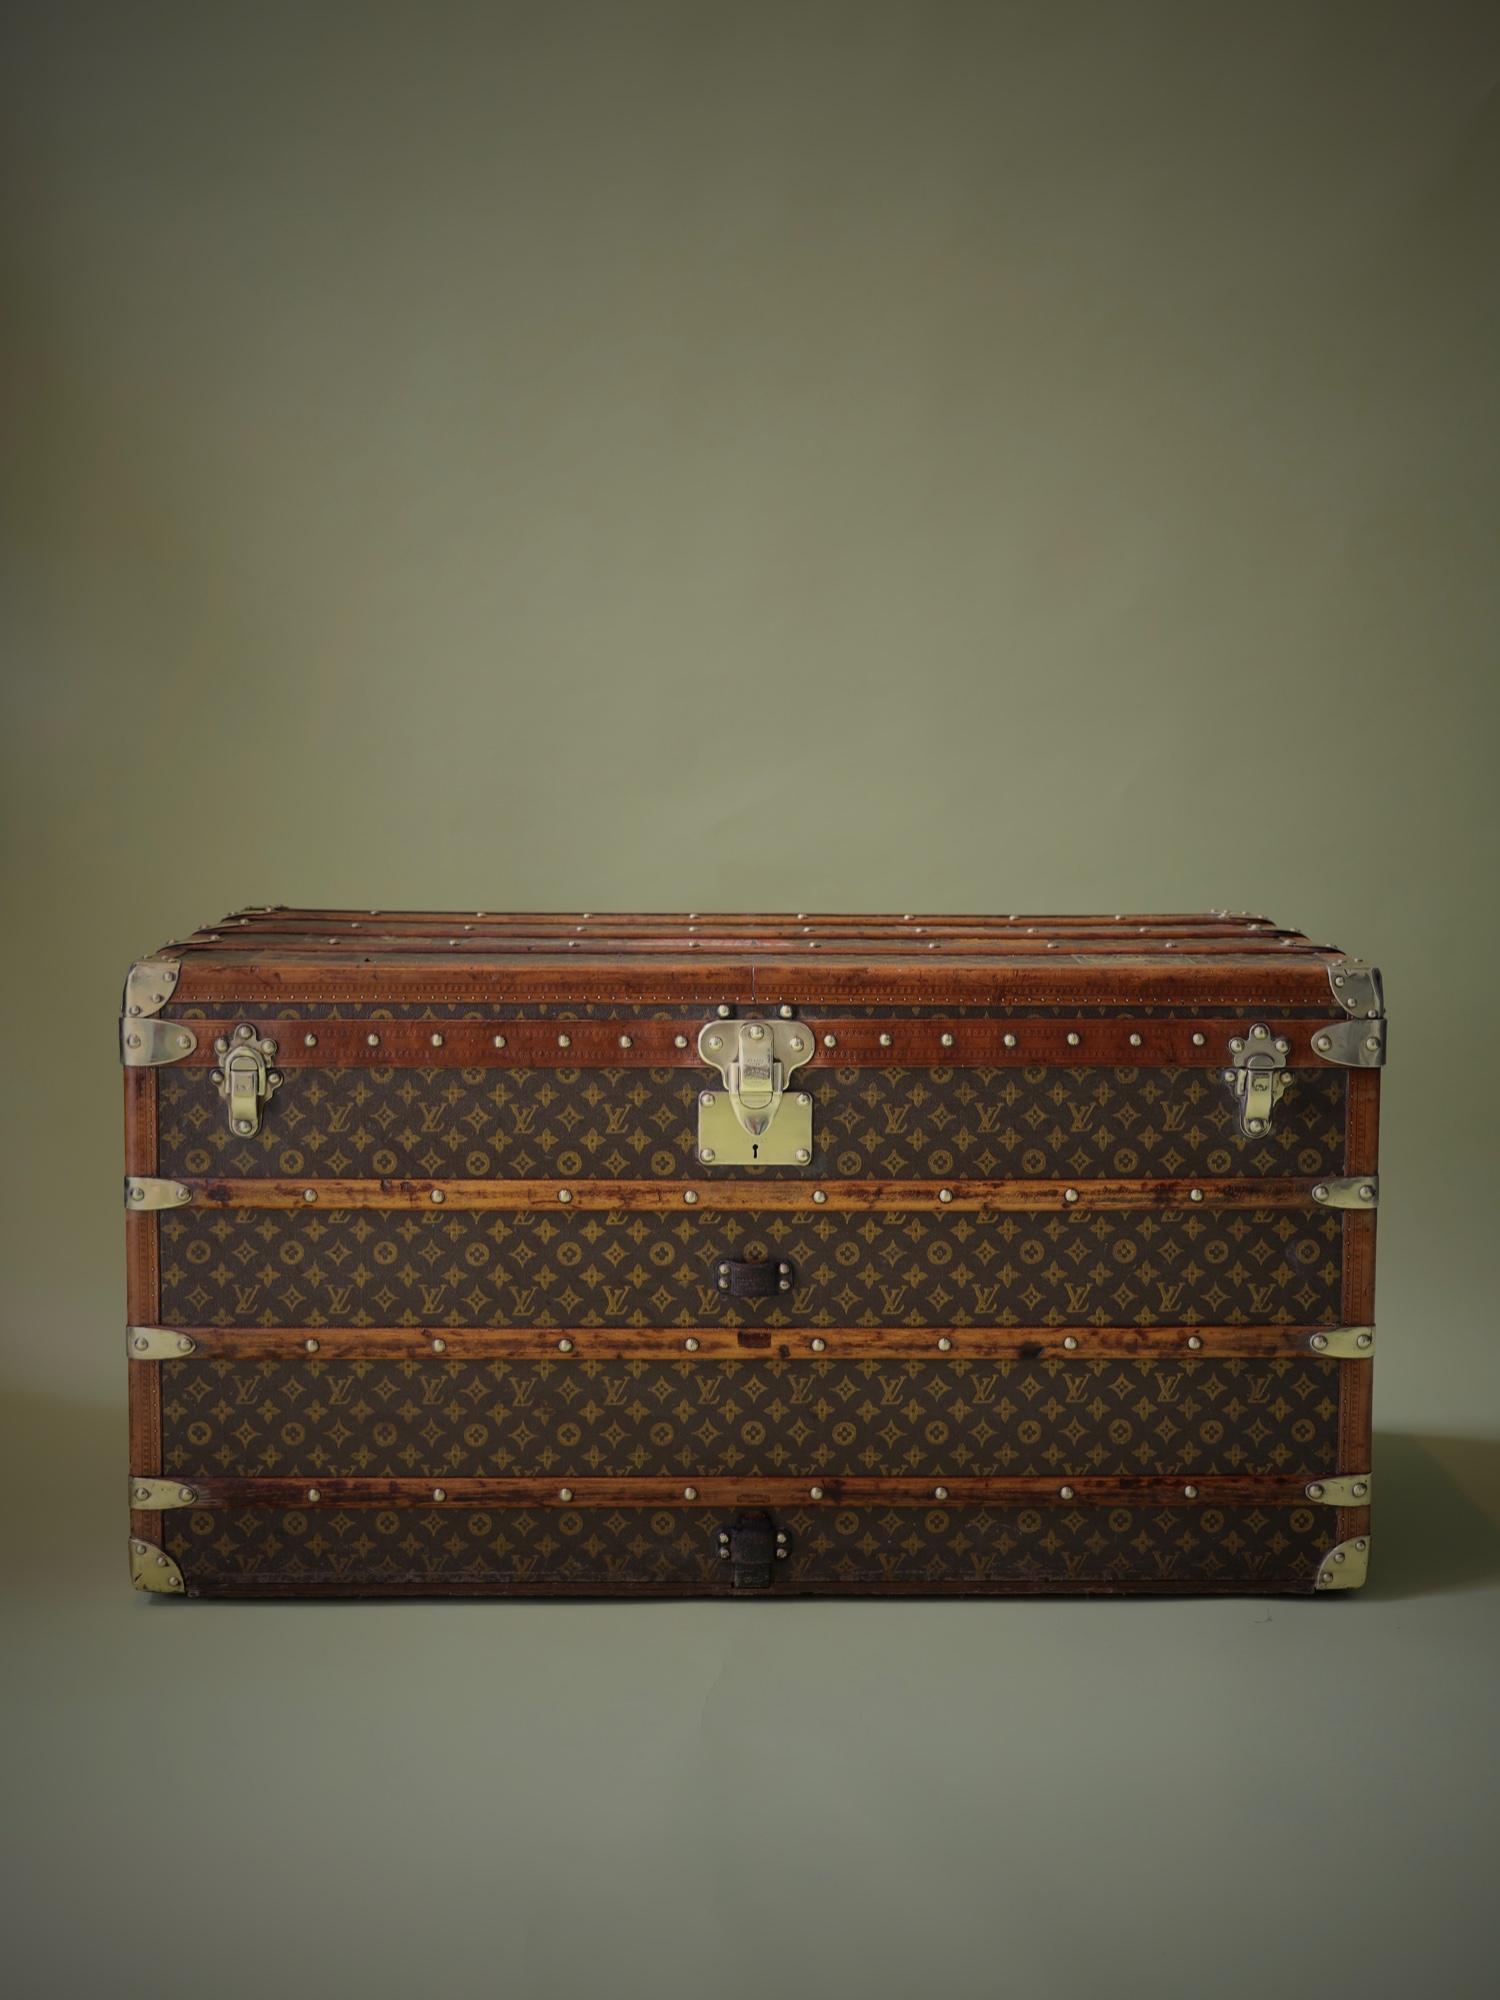 the-well-traveled-trunk-louis-vuitton-thumbnail-product-5751-1